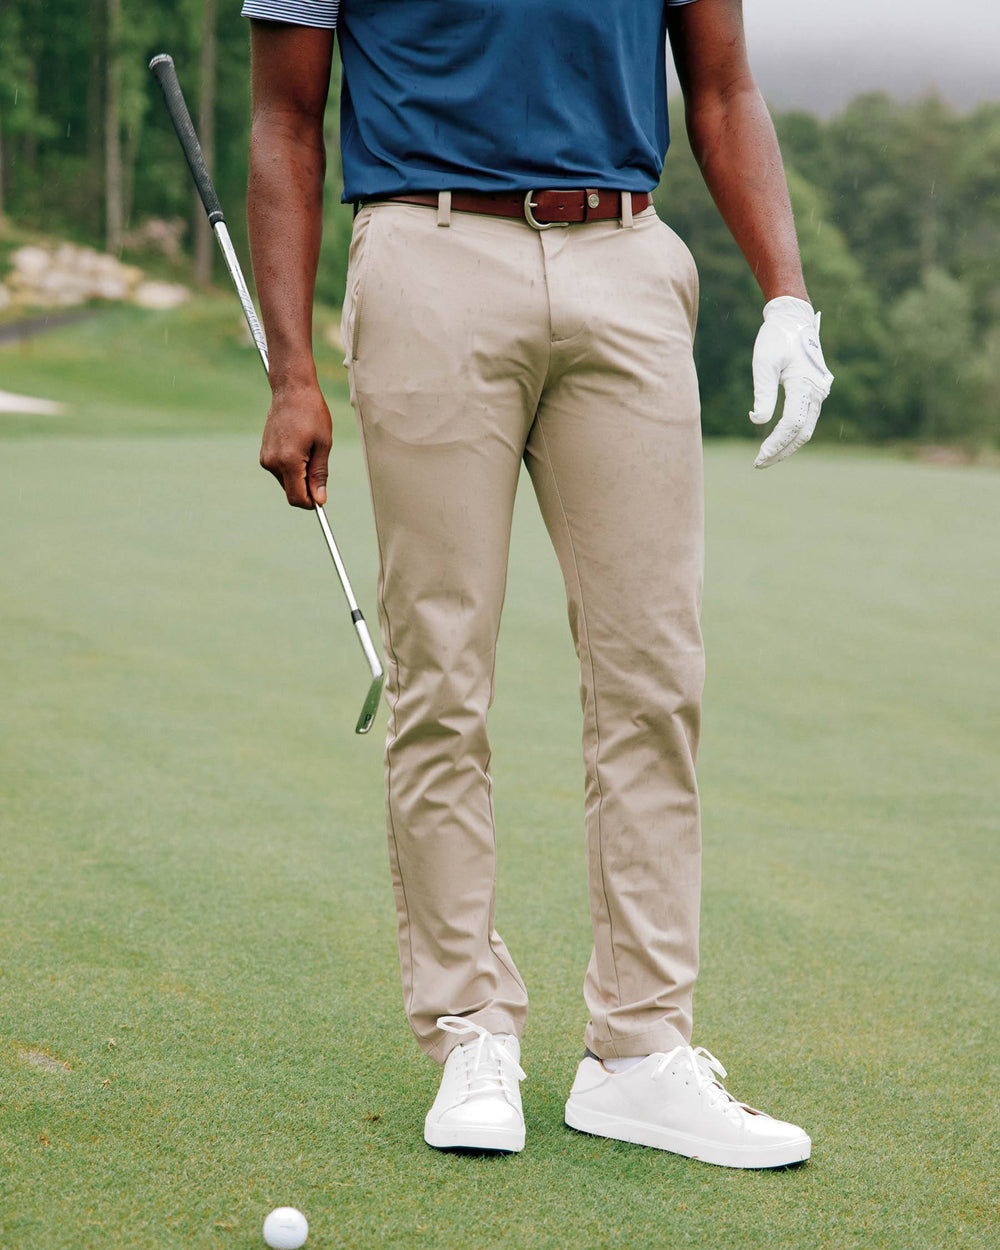 The front view of the Southern Tide Jack Performance Pant by Southern Tide - Sandstone Khaki